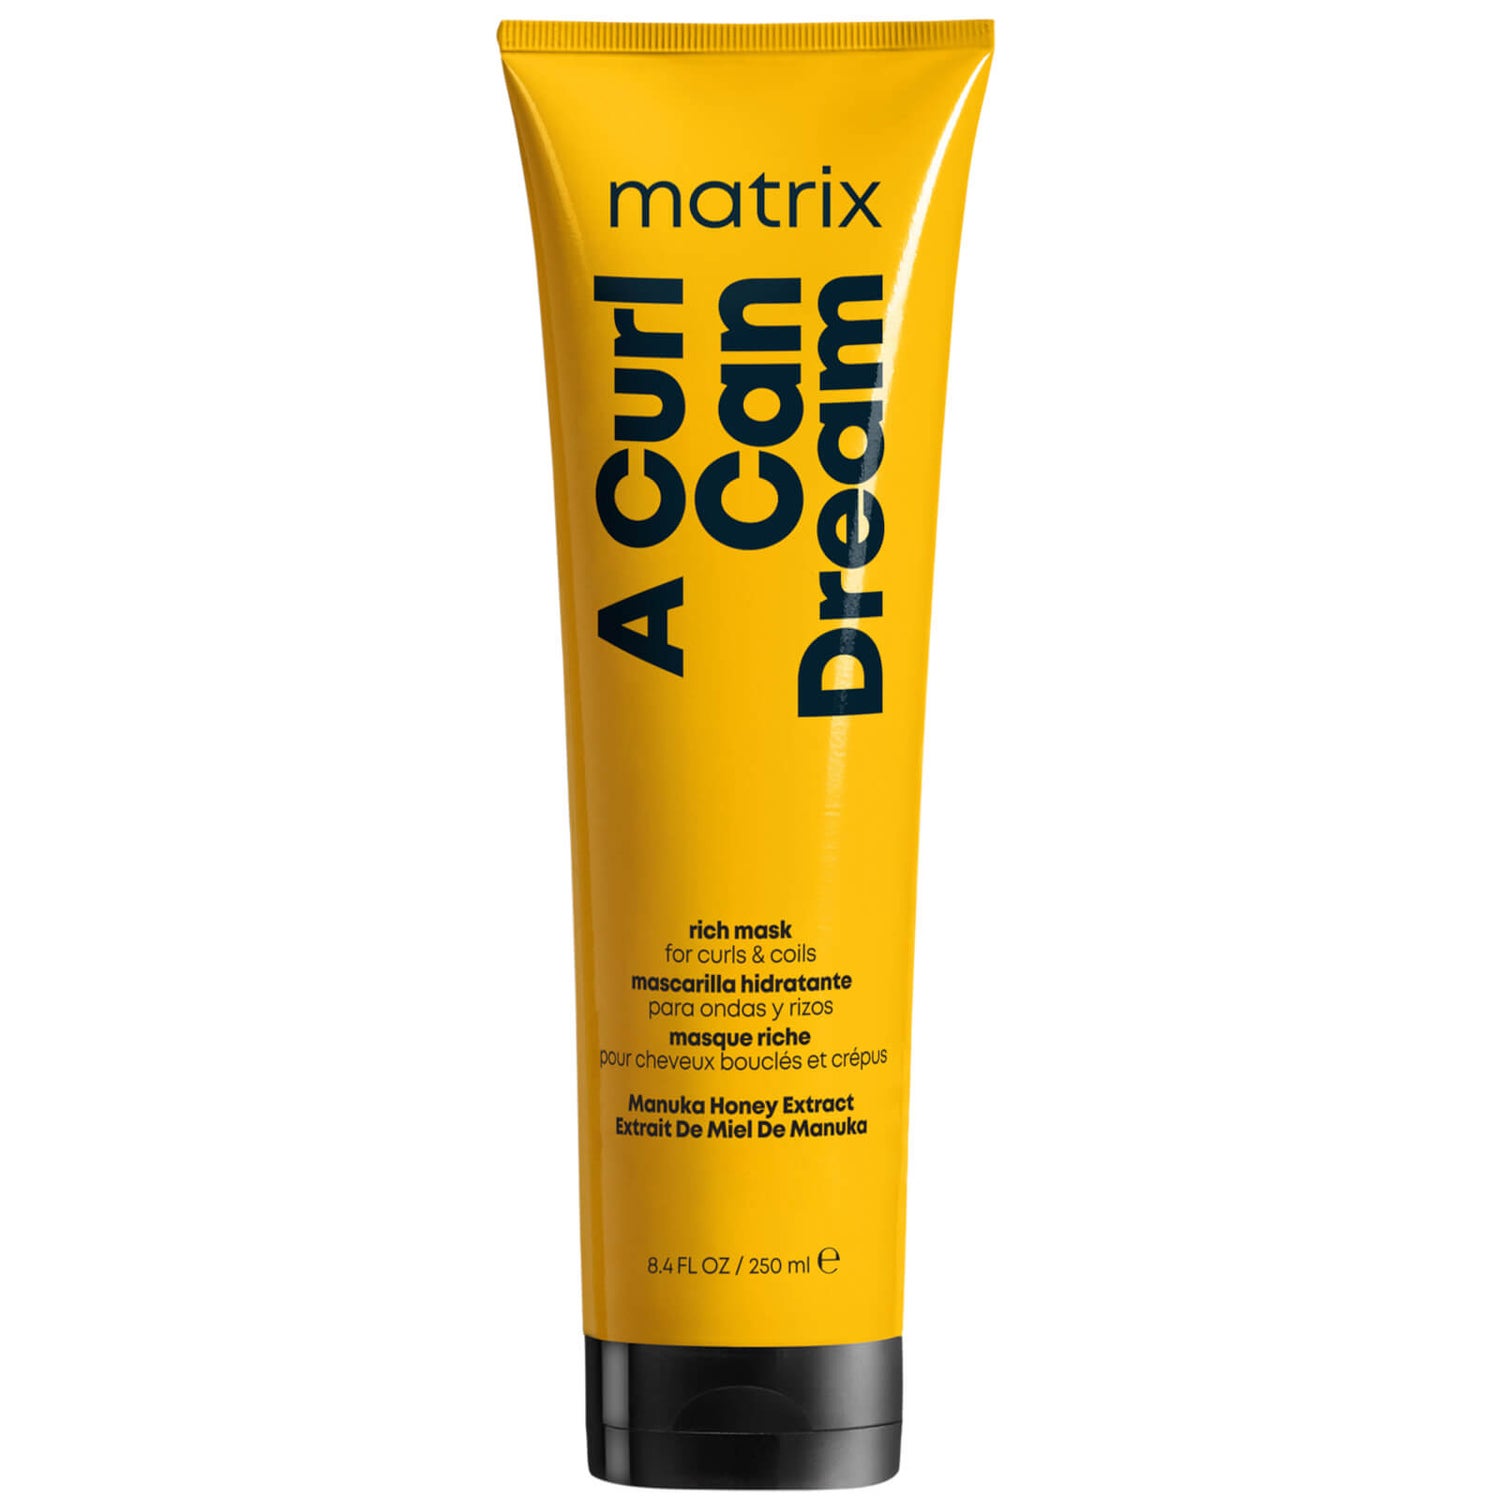 Matrix A Curl Can Dream Rich Hydrating Hair Mask for Curls and Coils 250ml